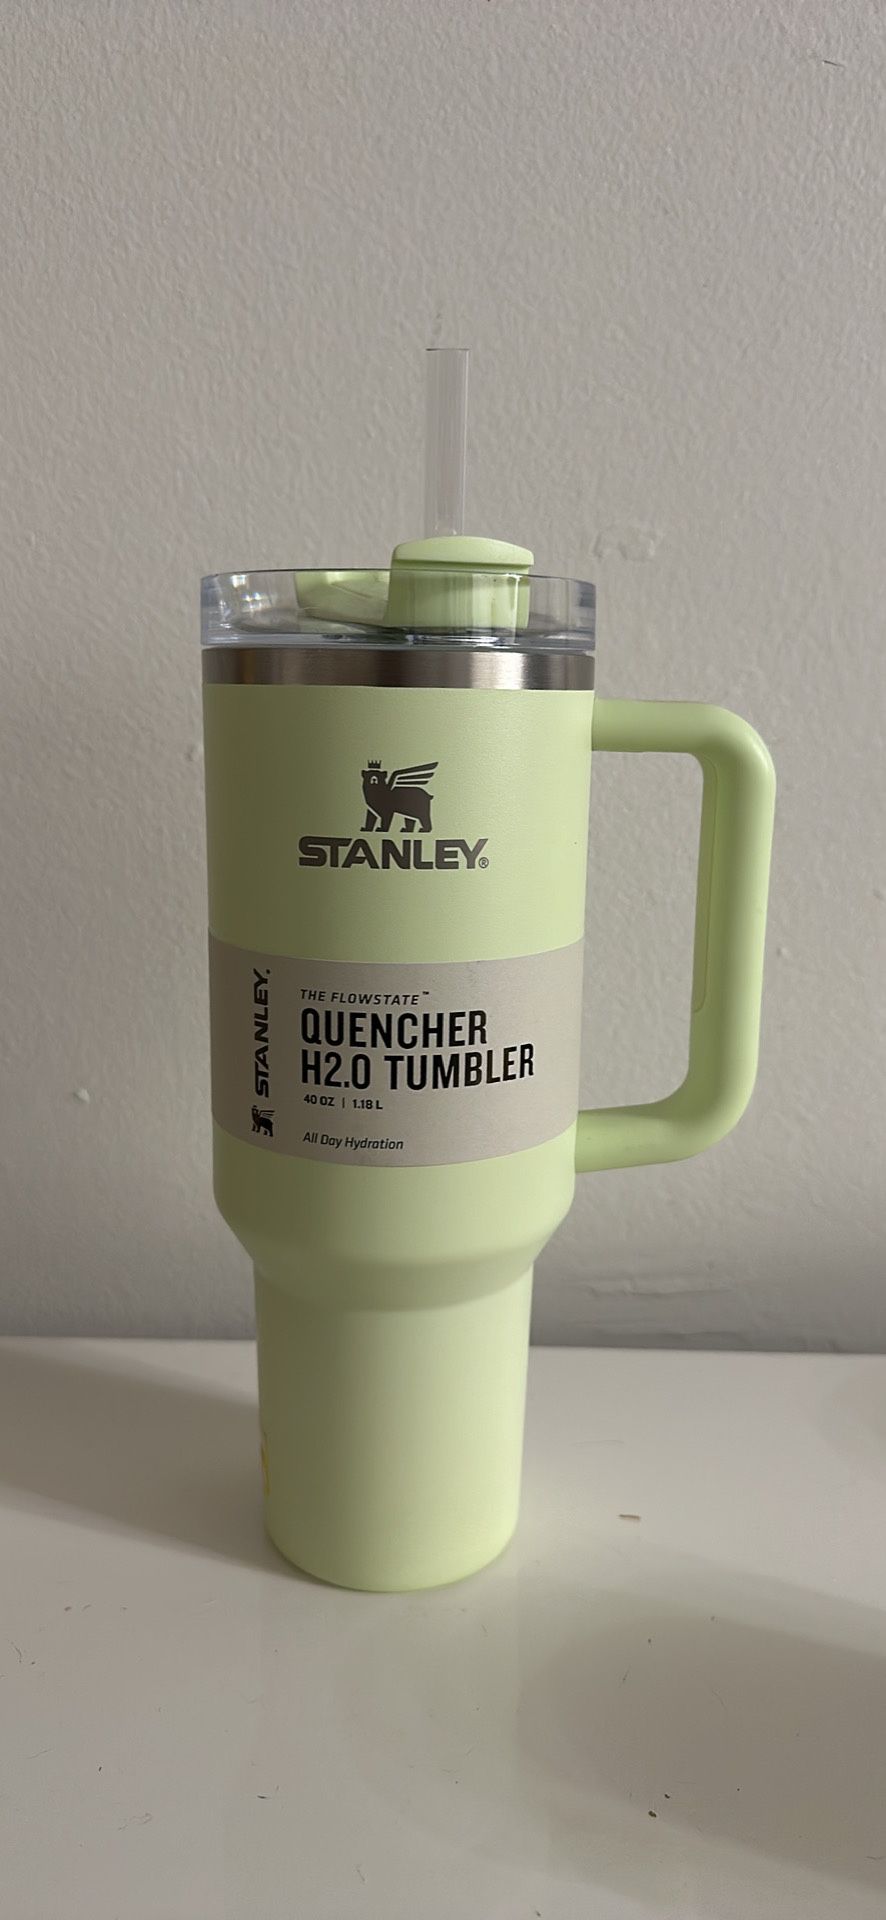 NWT Stanley Quencher H2.0 Tumbler 40 oz